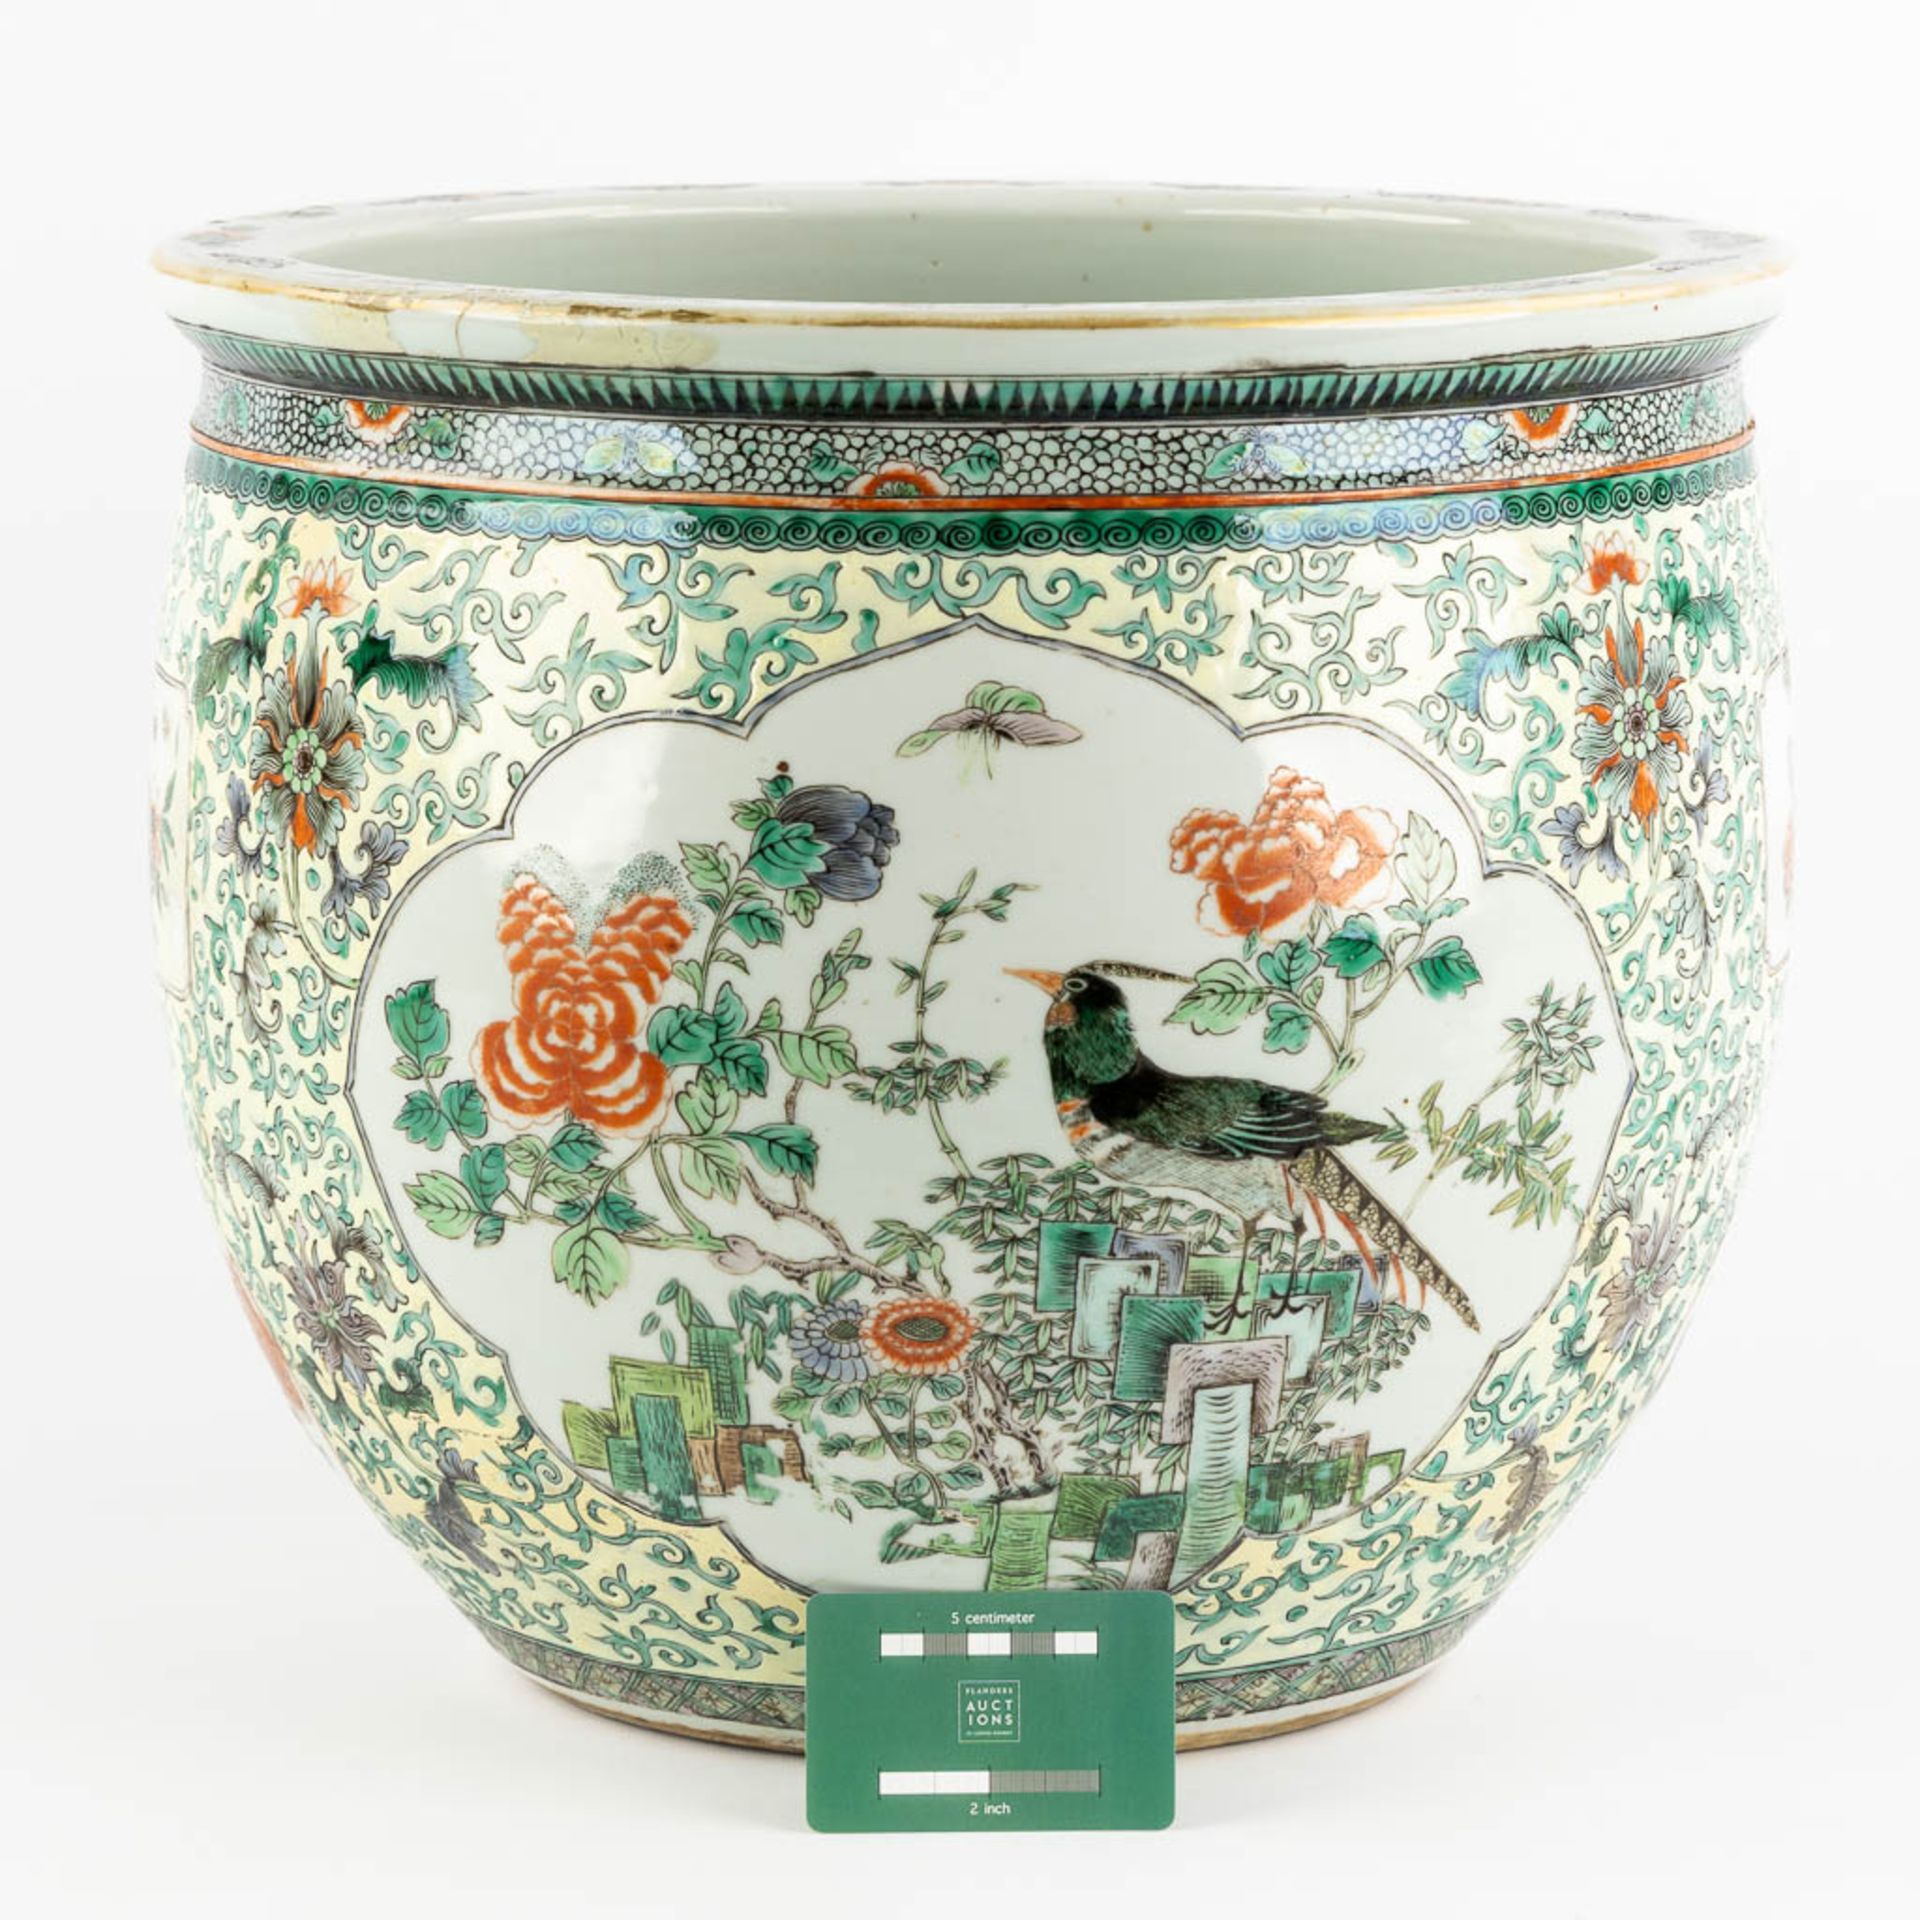 A Large Chinese Cache-Pot, Famille Verte decorated with fauna and flora. 19th C. (H:35 x D:40 cm) - Image 2 of 14